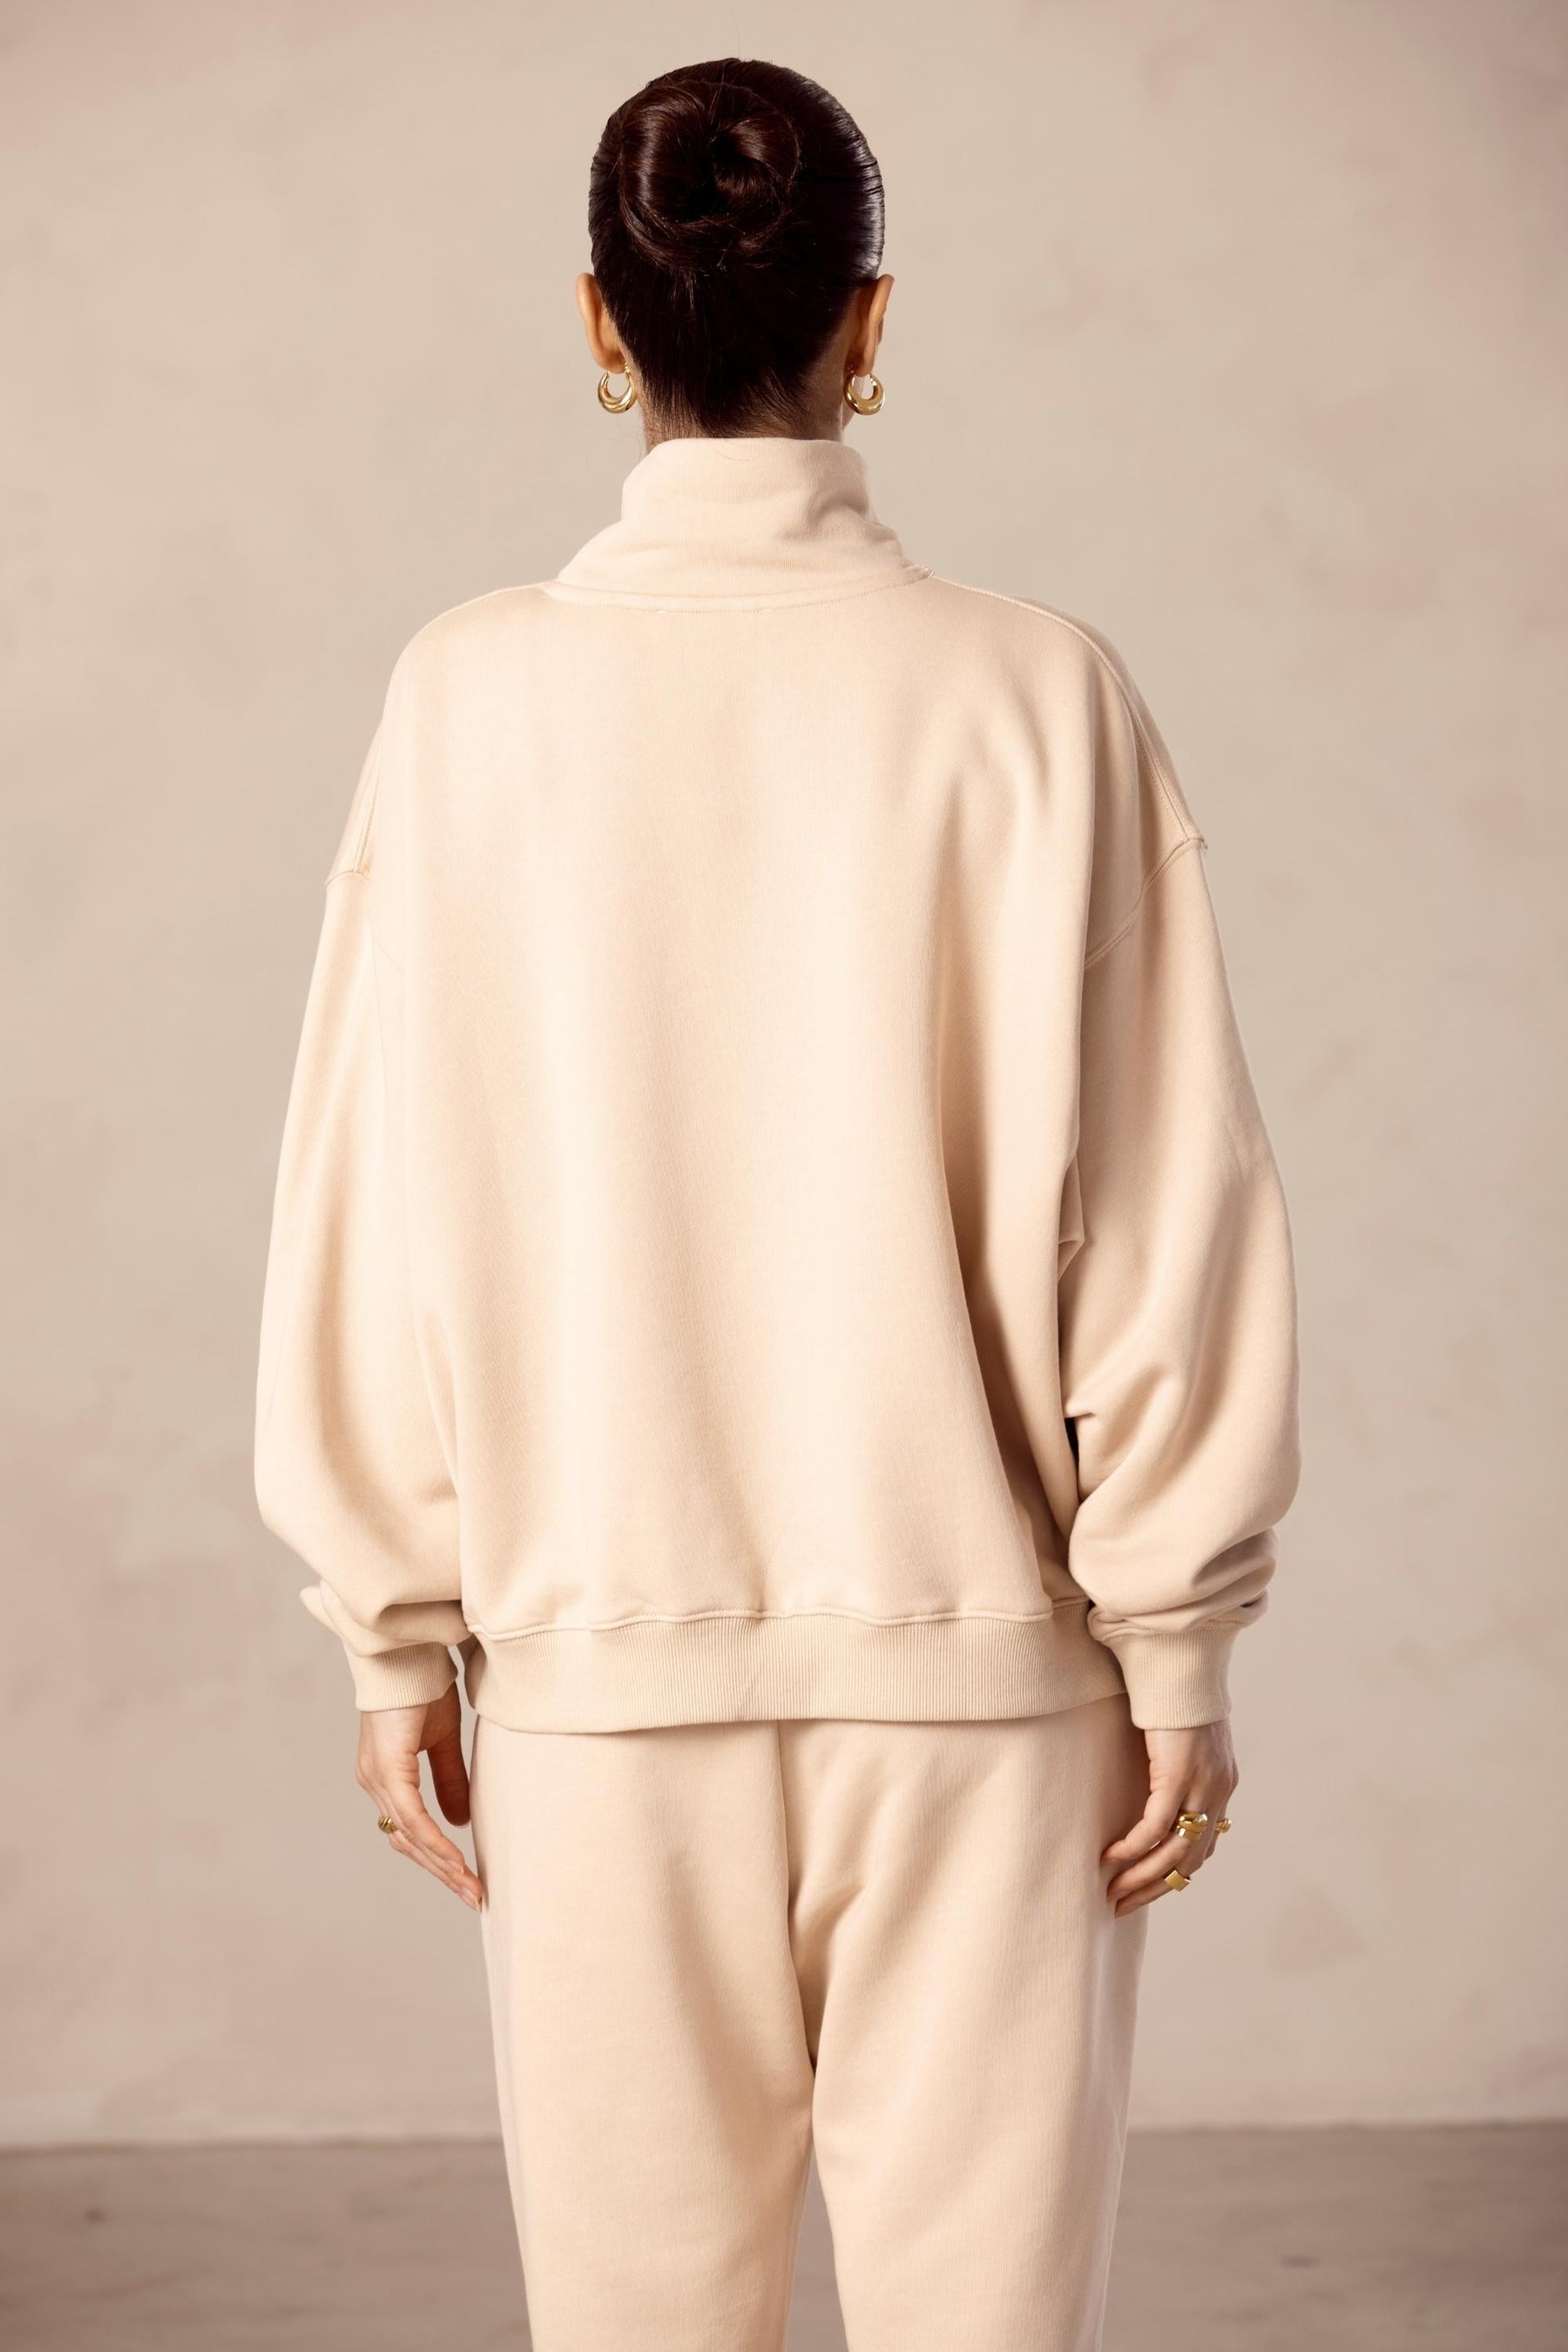 Pullover Mock Neck Sweatshirt - Nude Veiled Collection 